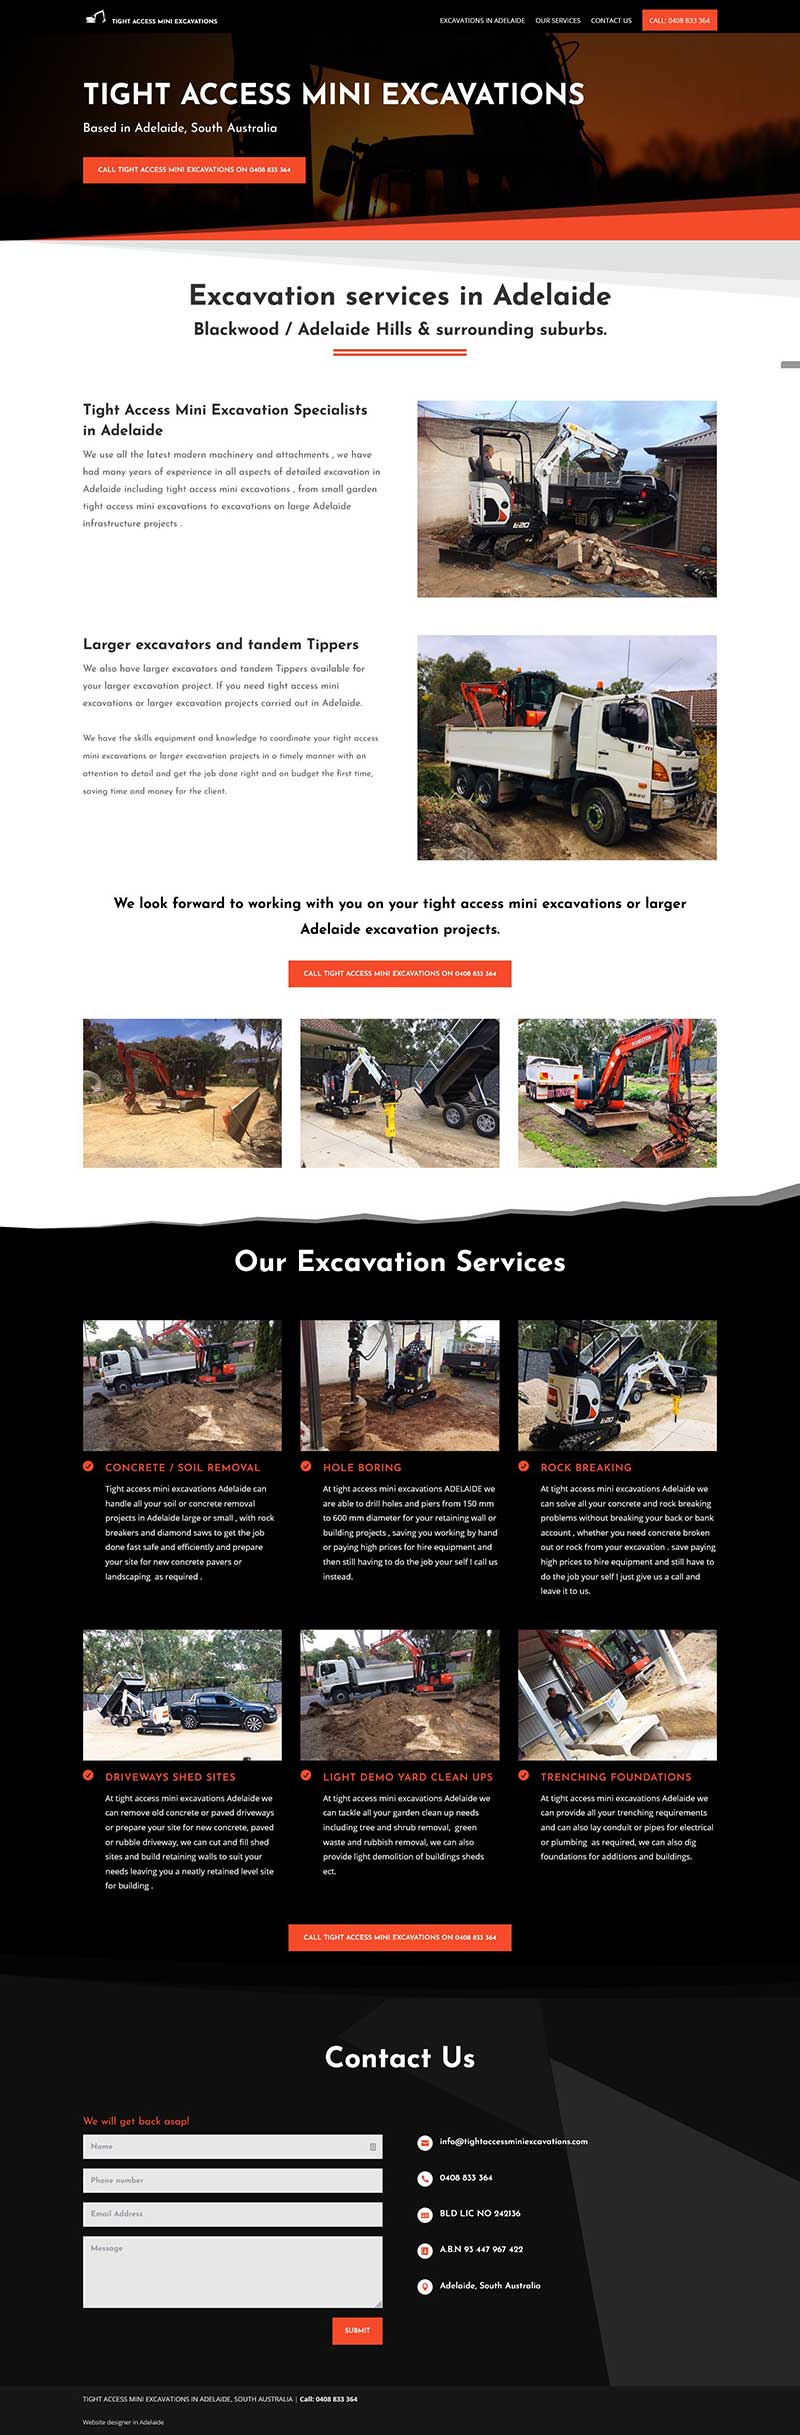 Website design for an excavation business in Adelaide